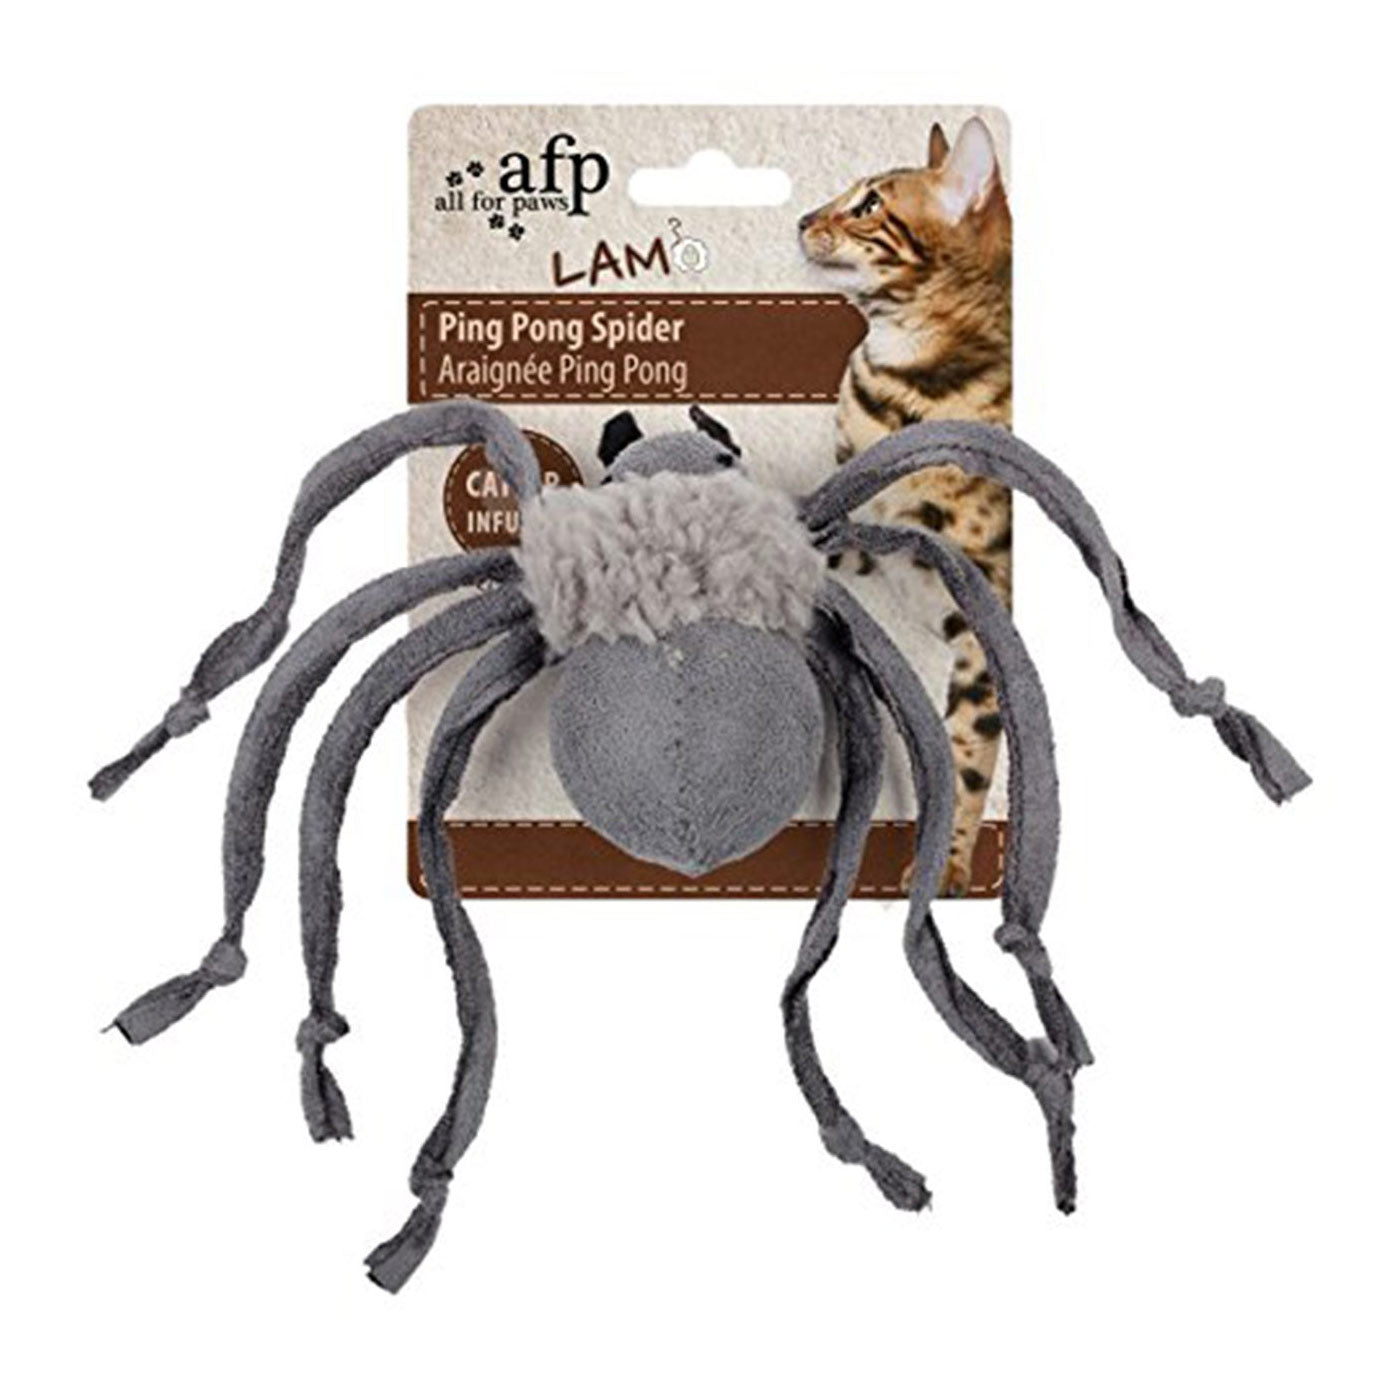 All For Paws Ping Pong Spider